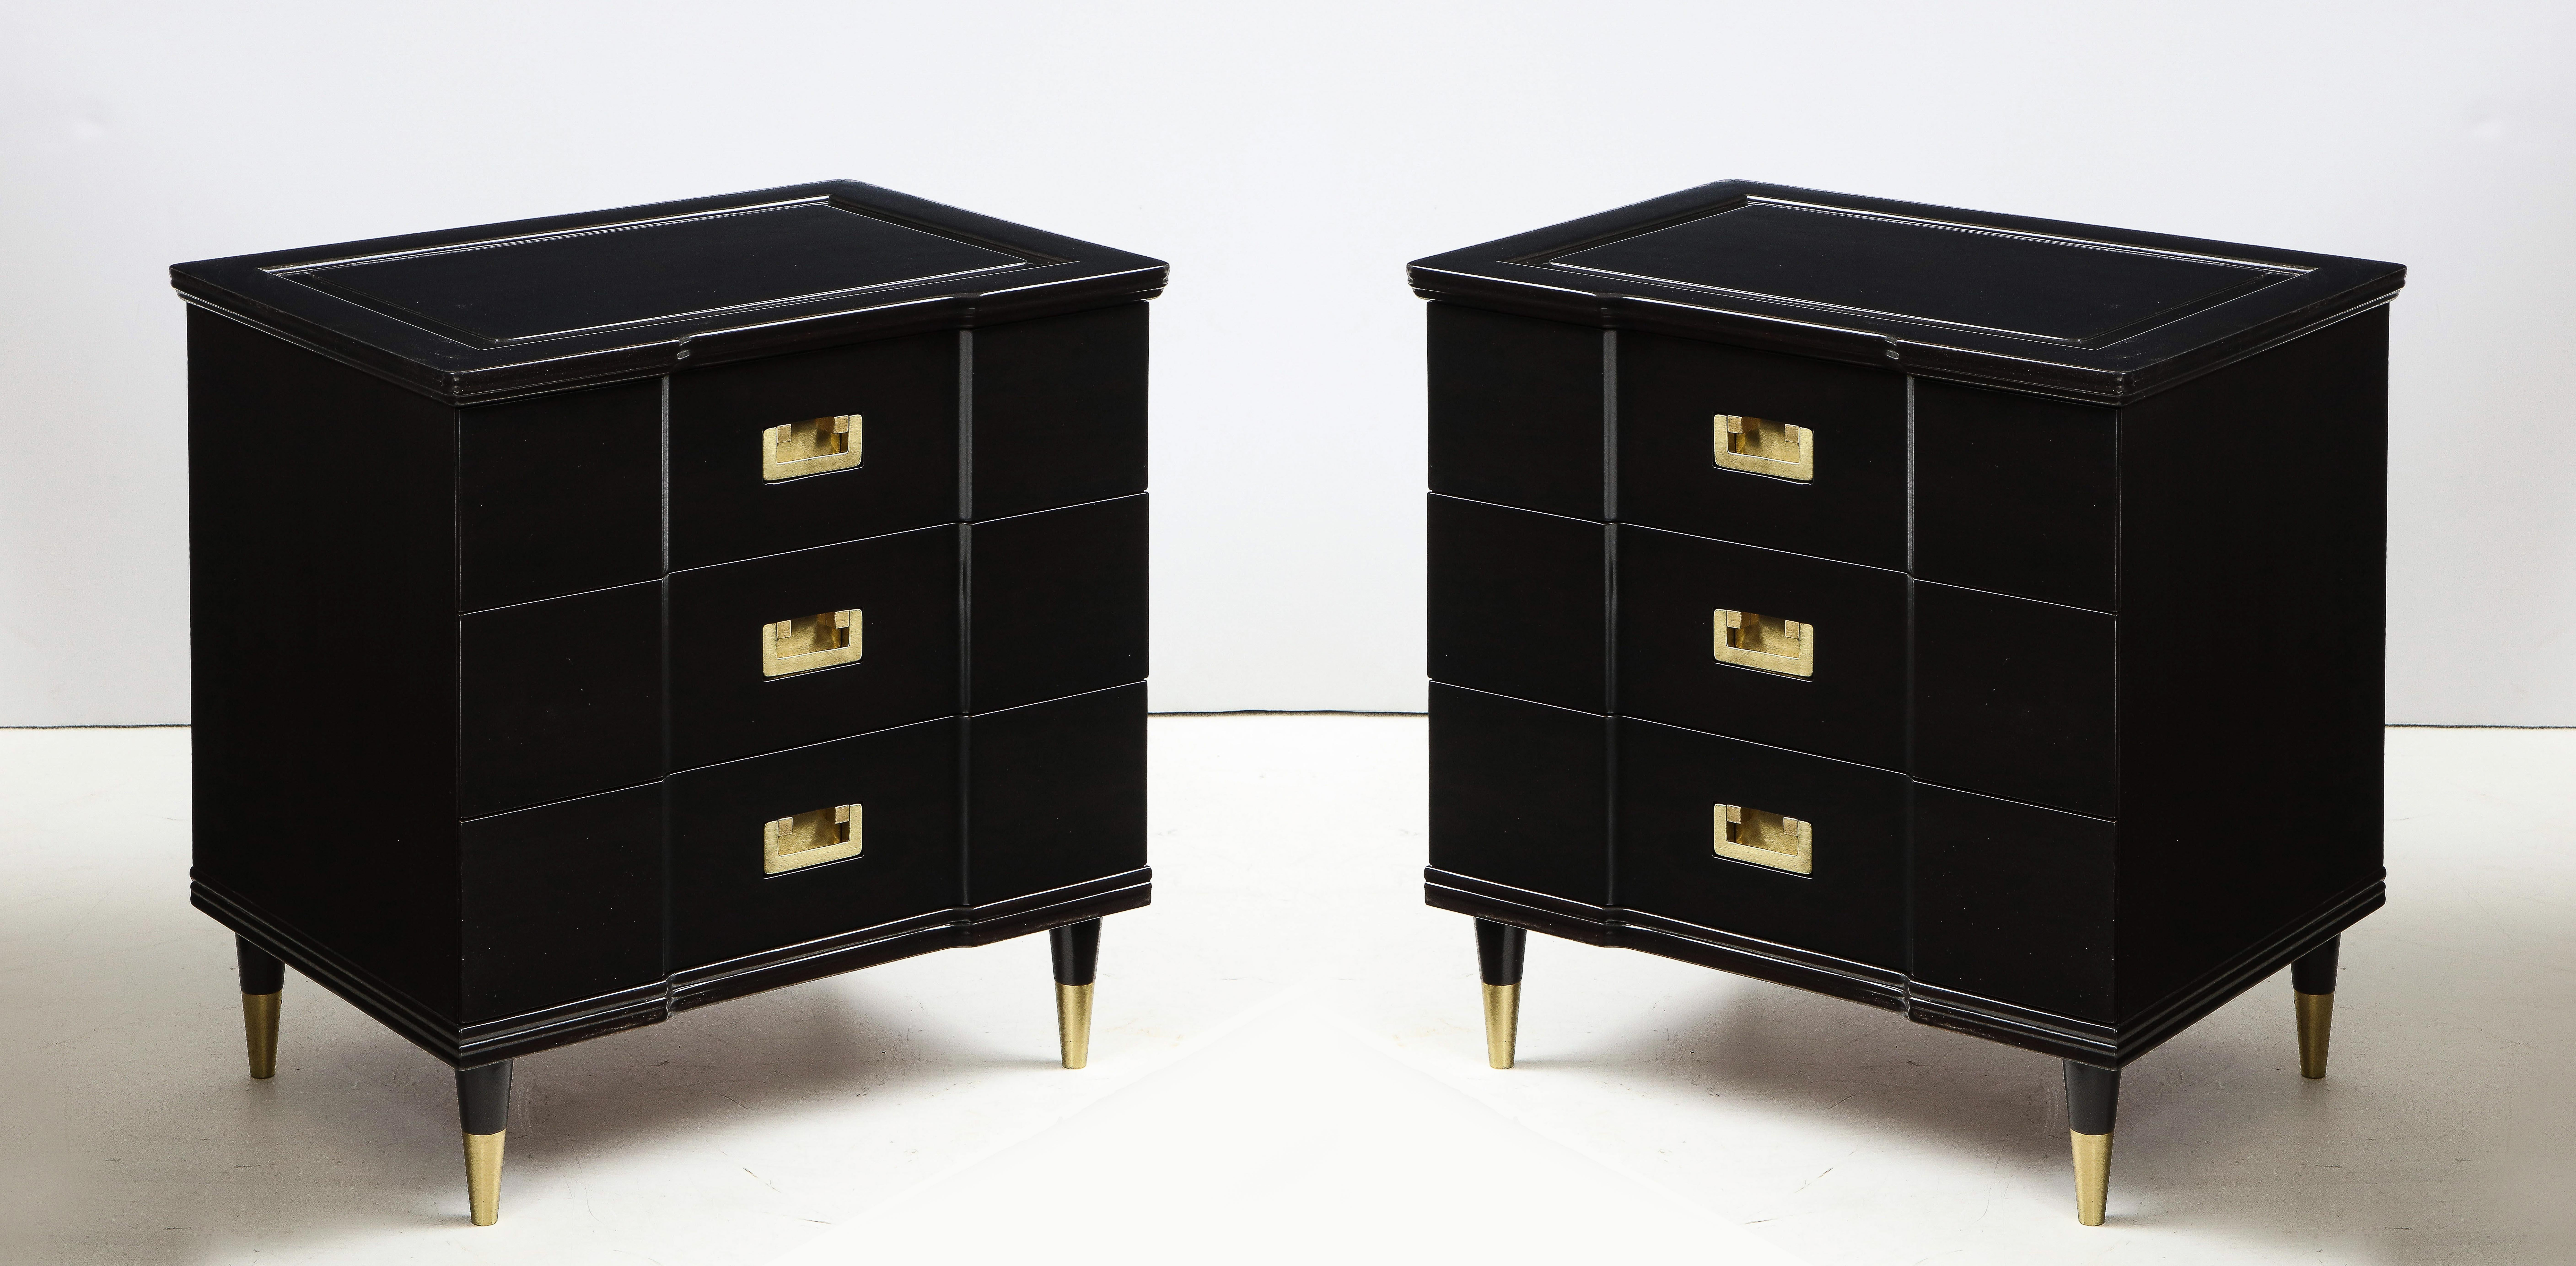 Pair of solid cherry nightstands in a custom ebonized stain finish with a slight sheen. Nightstands feature brushed brass pulls and sabots. Labeled.